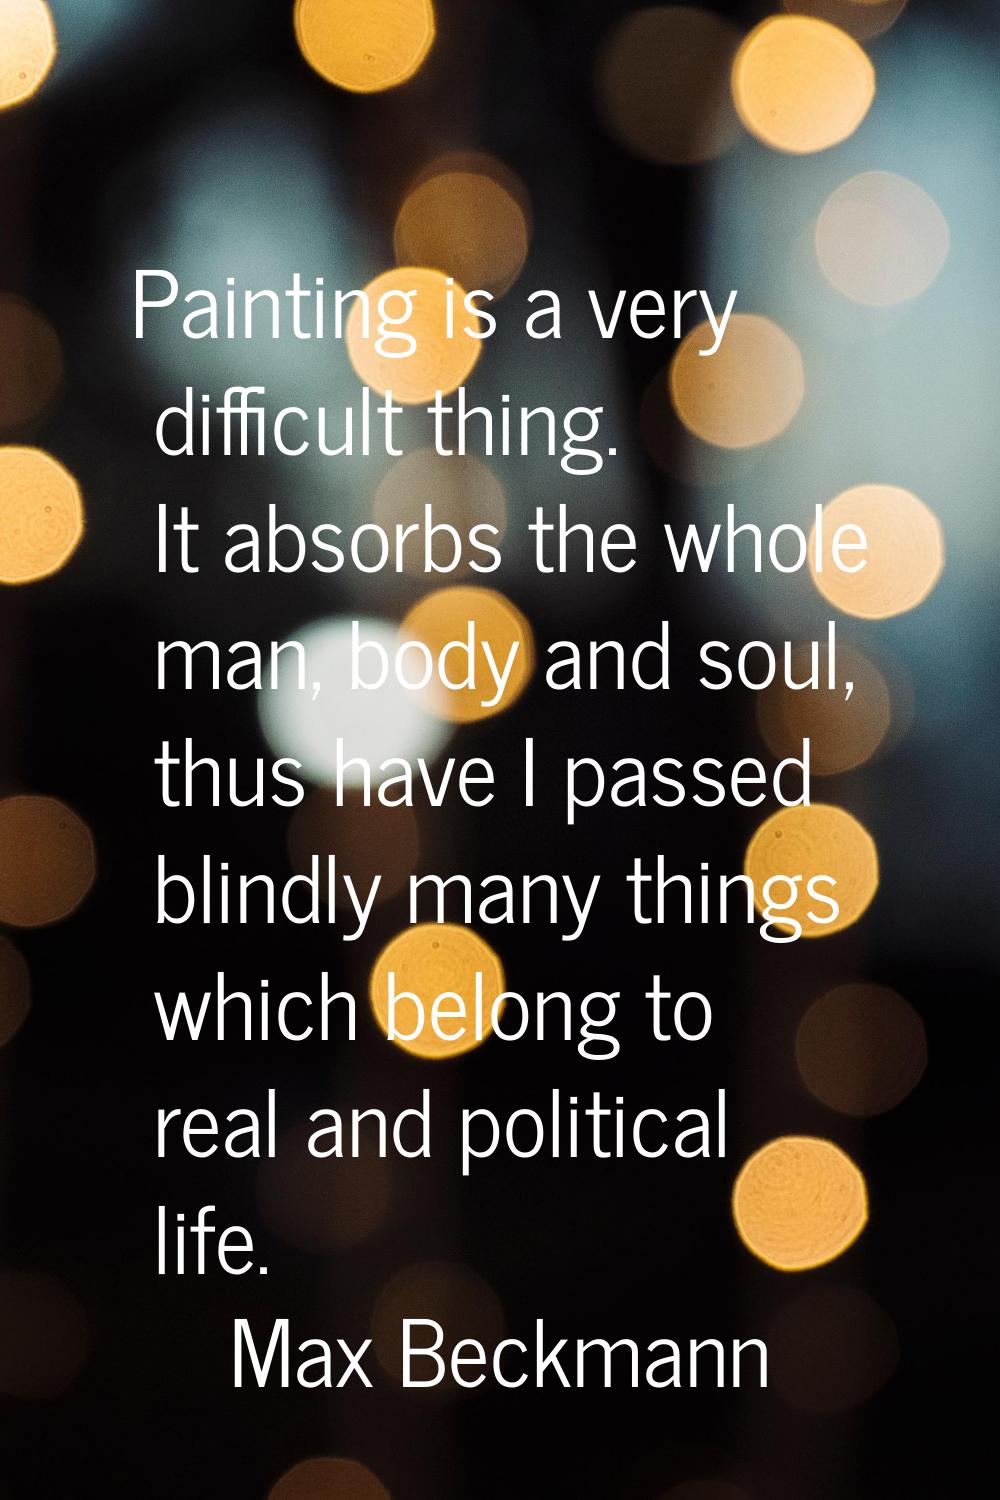 Painting is a very difficult thing. It absorbs the whole man, body and soul, thus have I passed bli